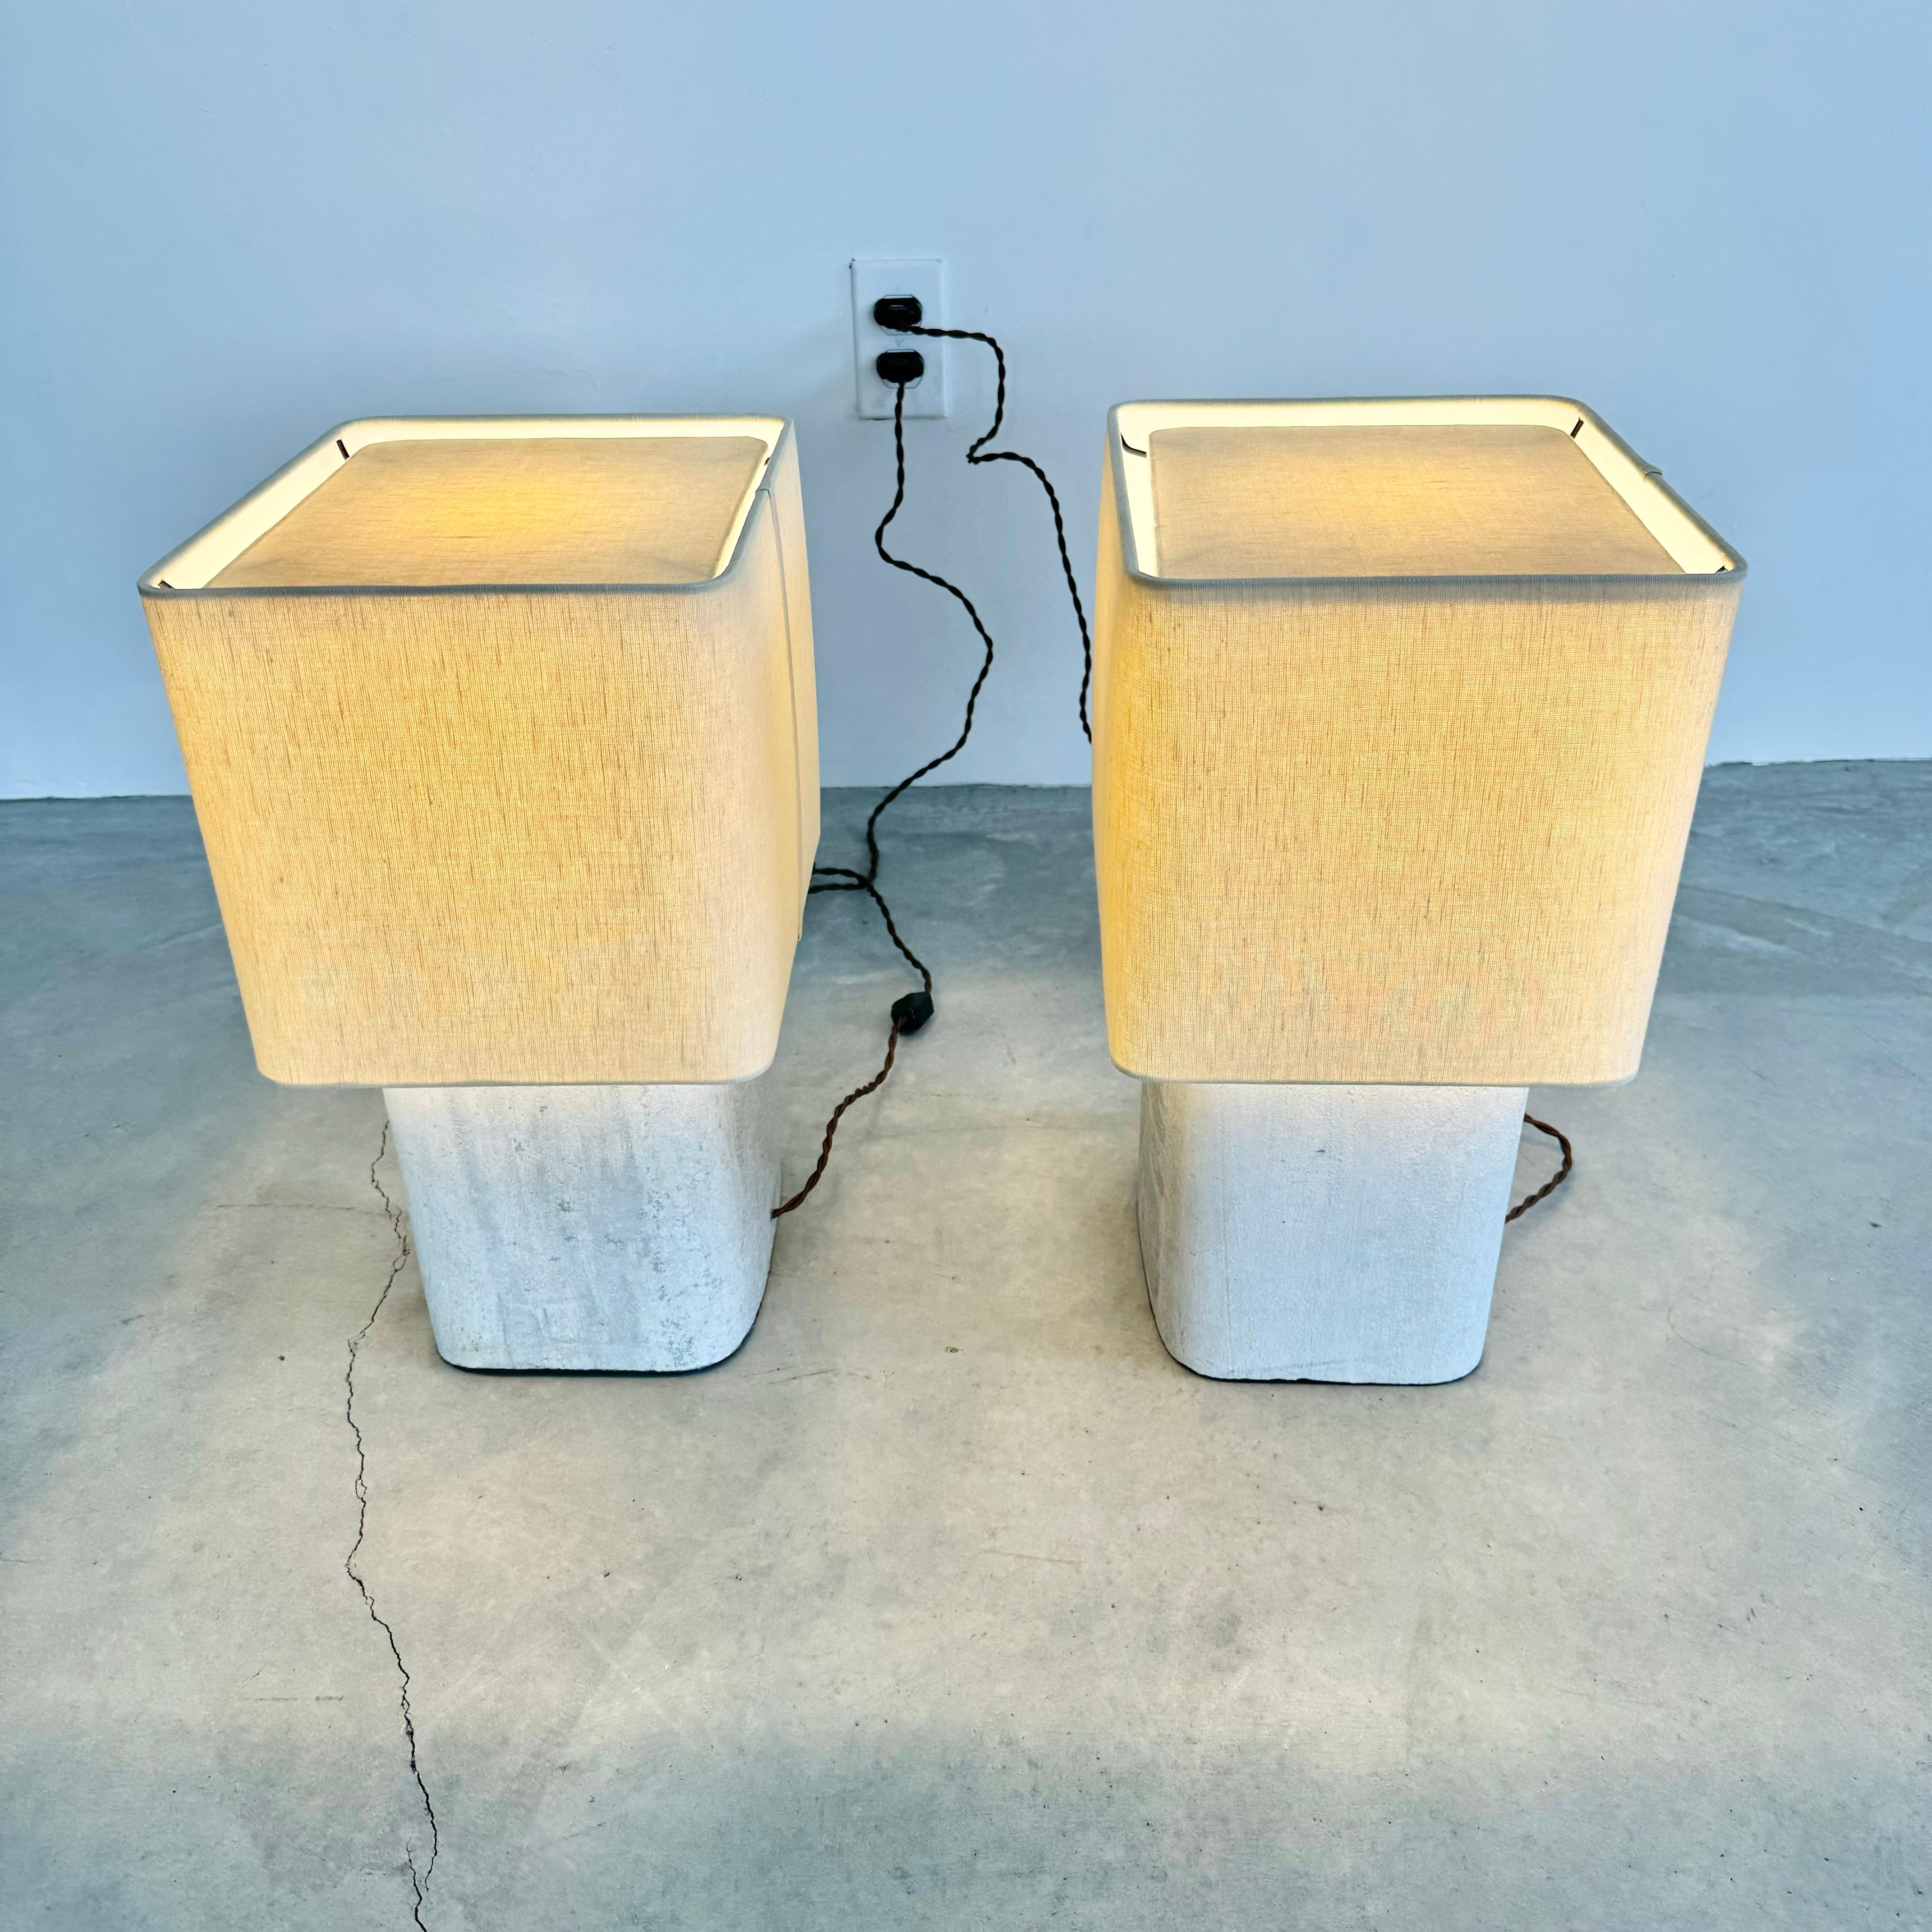 Pair of Willy Guhl Concrete Table Lamps, 1960s Switzerland For Sale 1